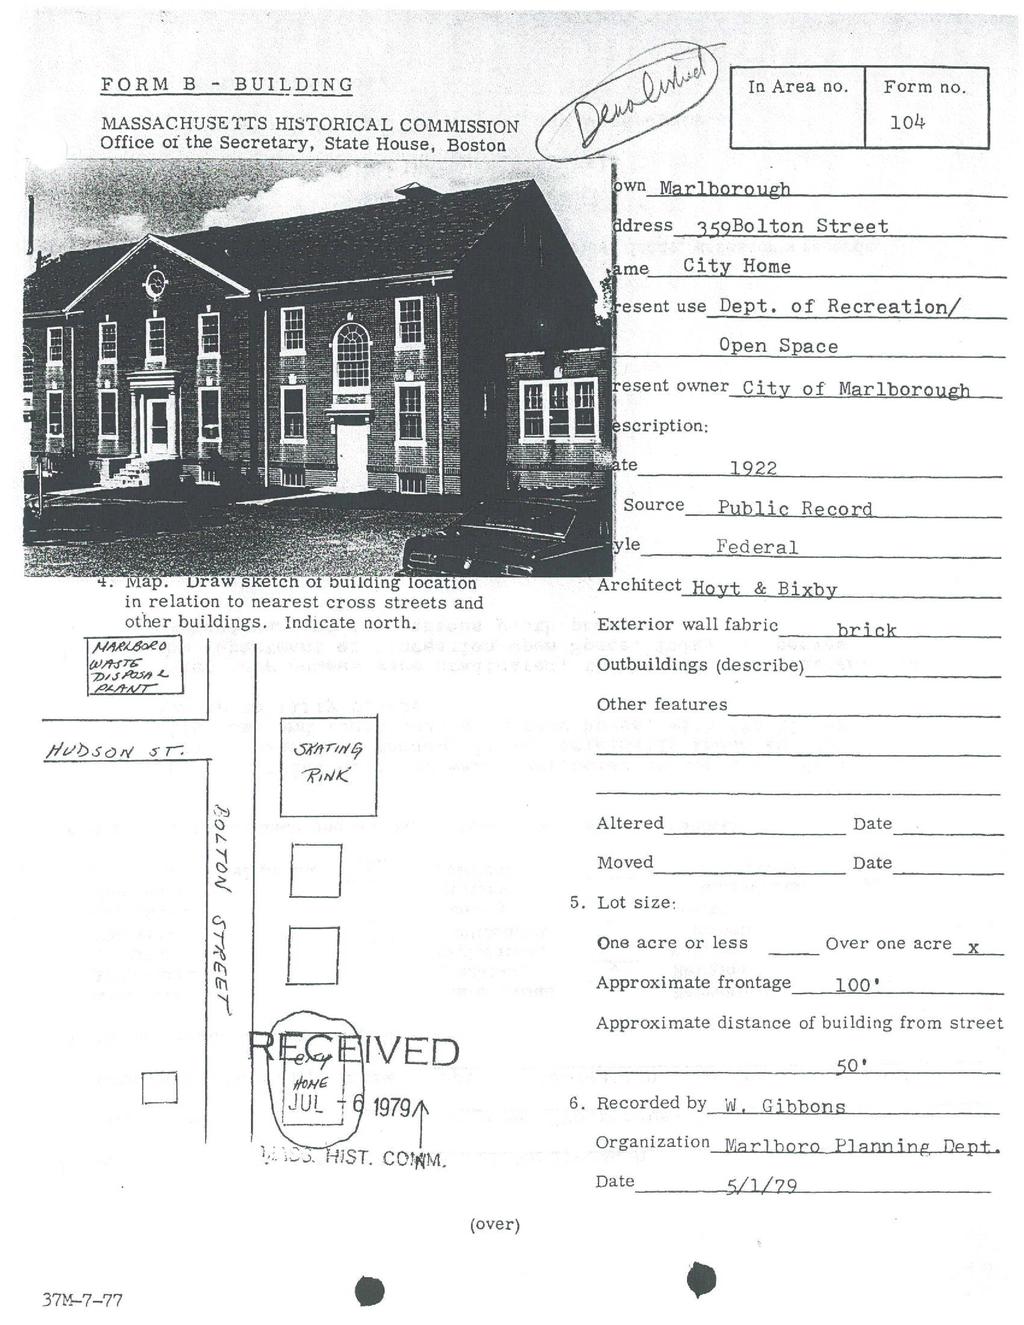 FORM B - BUILDING In Area no. Form no. MASSACHUSETTS HISTORICAL COMMISSION Office oi the Secretary, State House, Boston 104 MarlborQugh 359Bo1ton Street me Ci ty Home Dept.